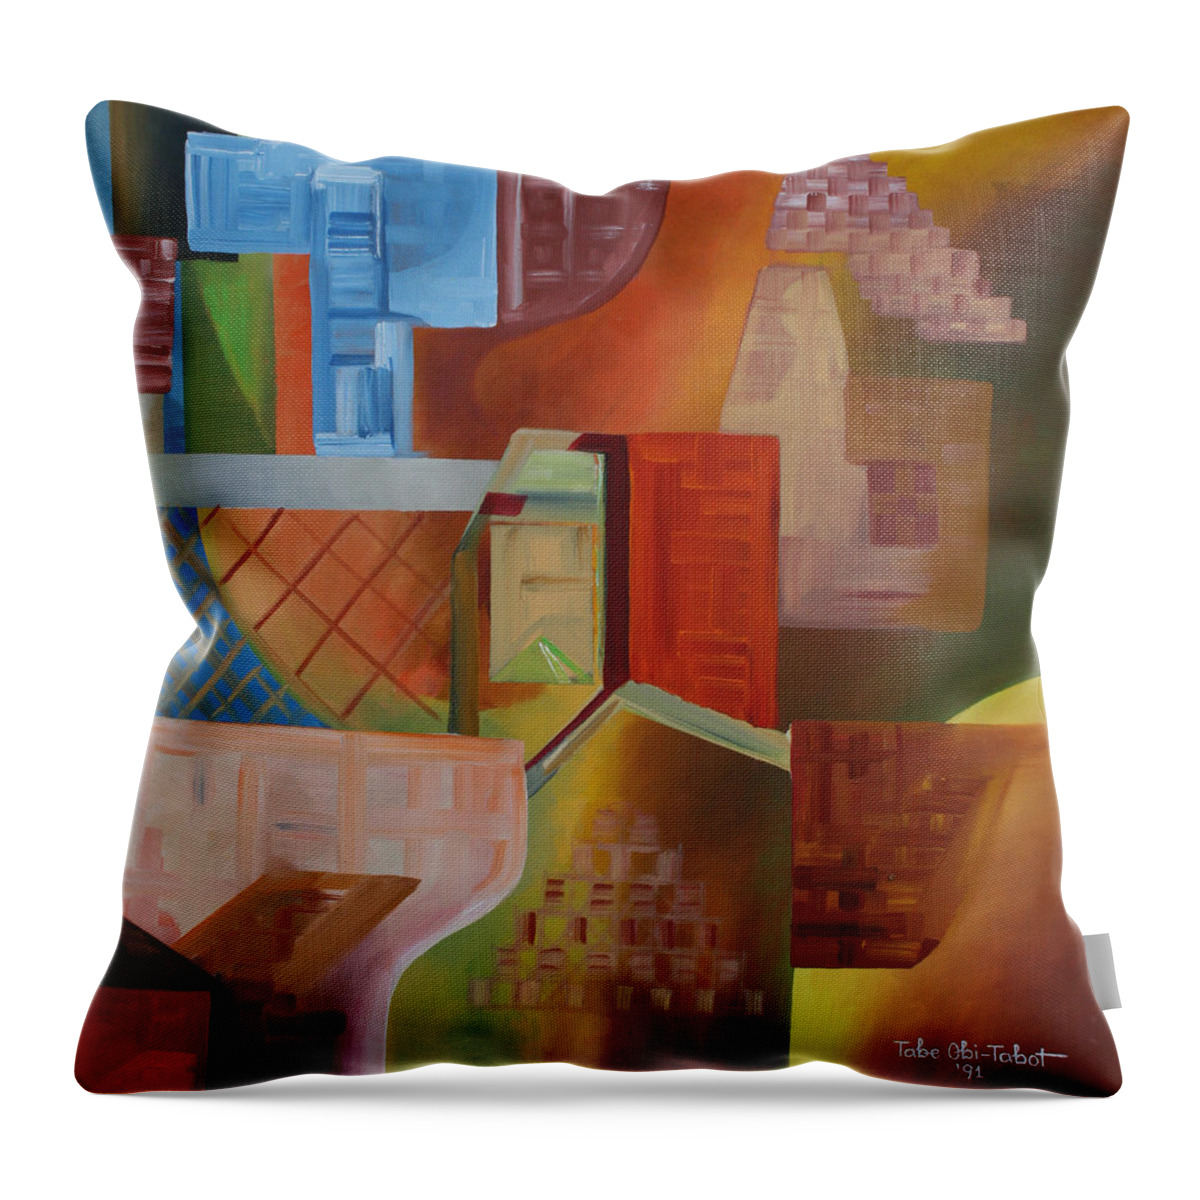 Series 1d Throw Pillow featuring the painting Series 1D by Obi-Tabot Tabe